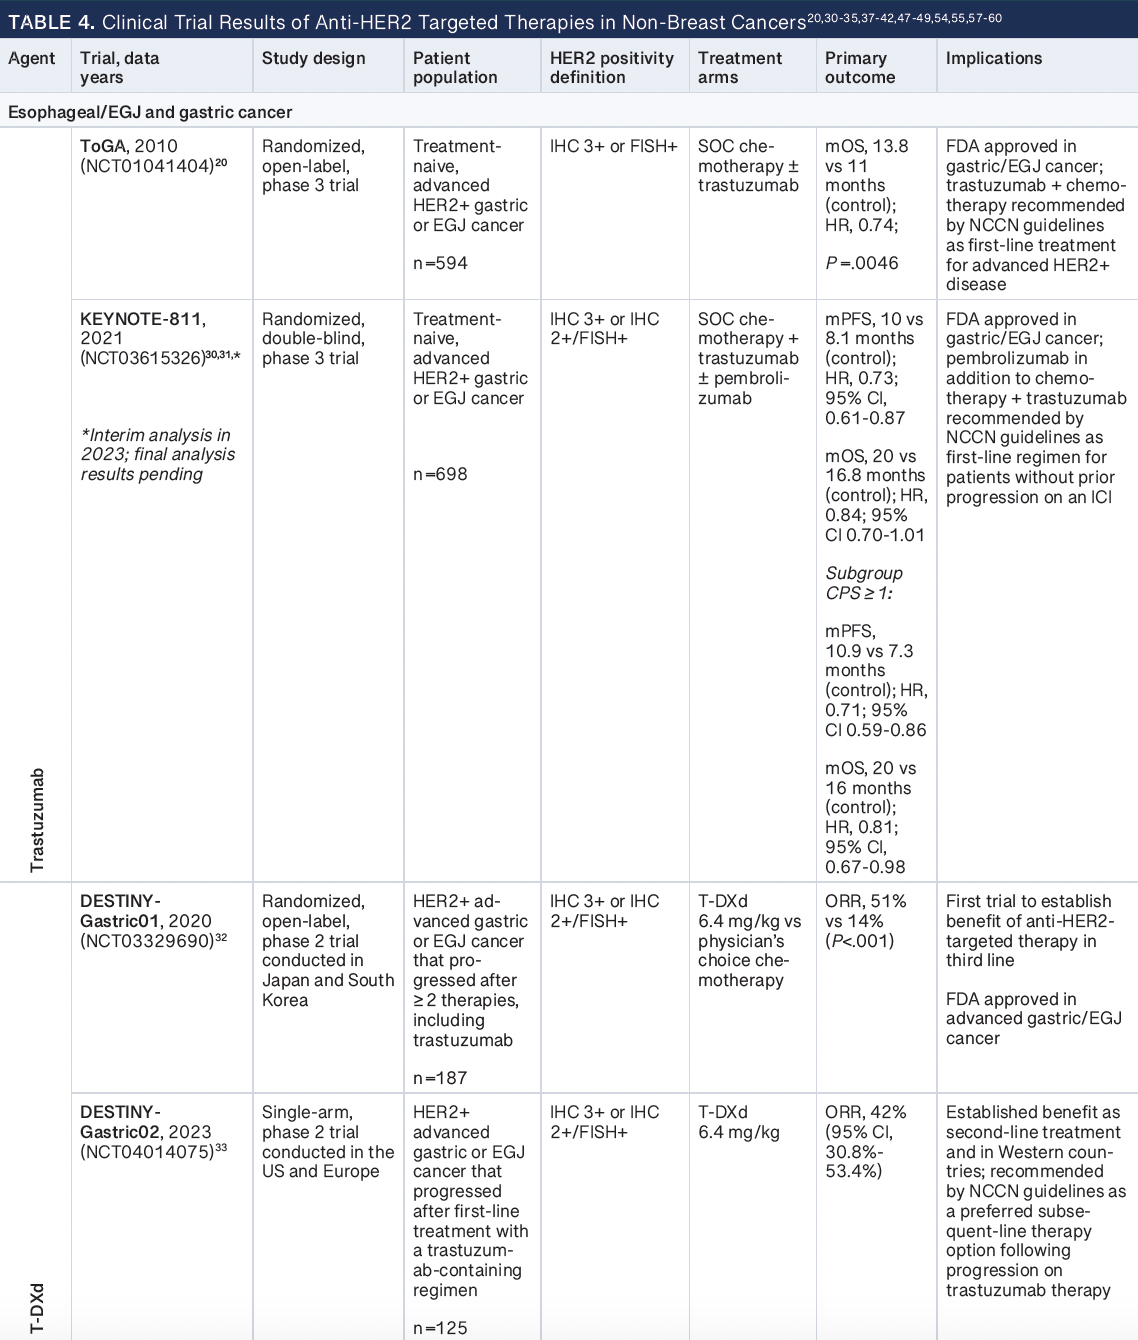 Table 4 -- CPS, combined positive score; EGJ, esophagogastric junction; FISH, fluorescence in situ hybridization; ICI, immune checkpoint inhibitor; IHC, immunohistochemistry; mOS, median overall survival; mPFS, median progression-free survival; NCCN, National Comprehensive Cancer Network; ORR, objective response rate; SOC, standard of care; T-DXd, trastuzumab deruxtecan.